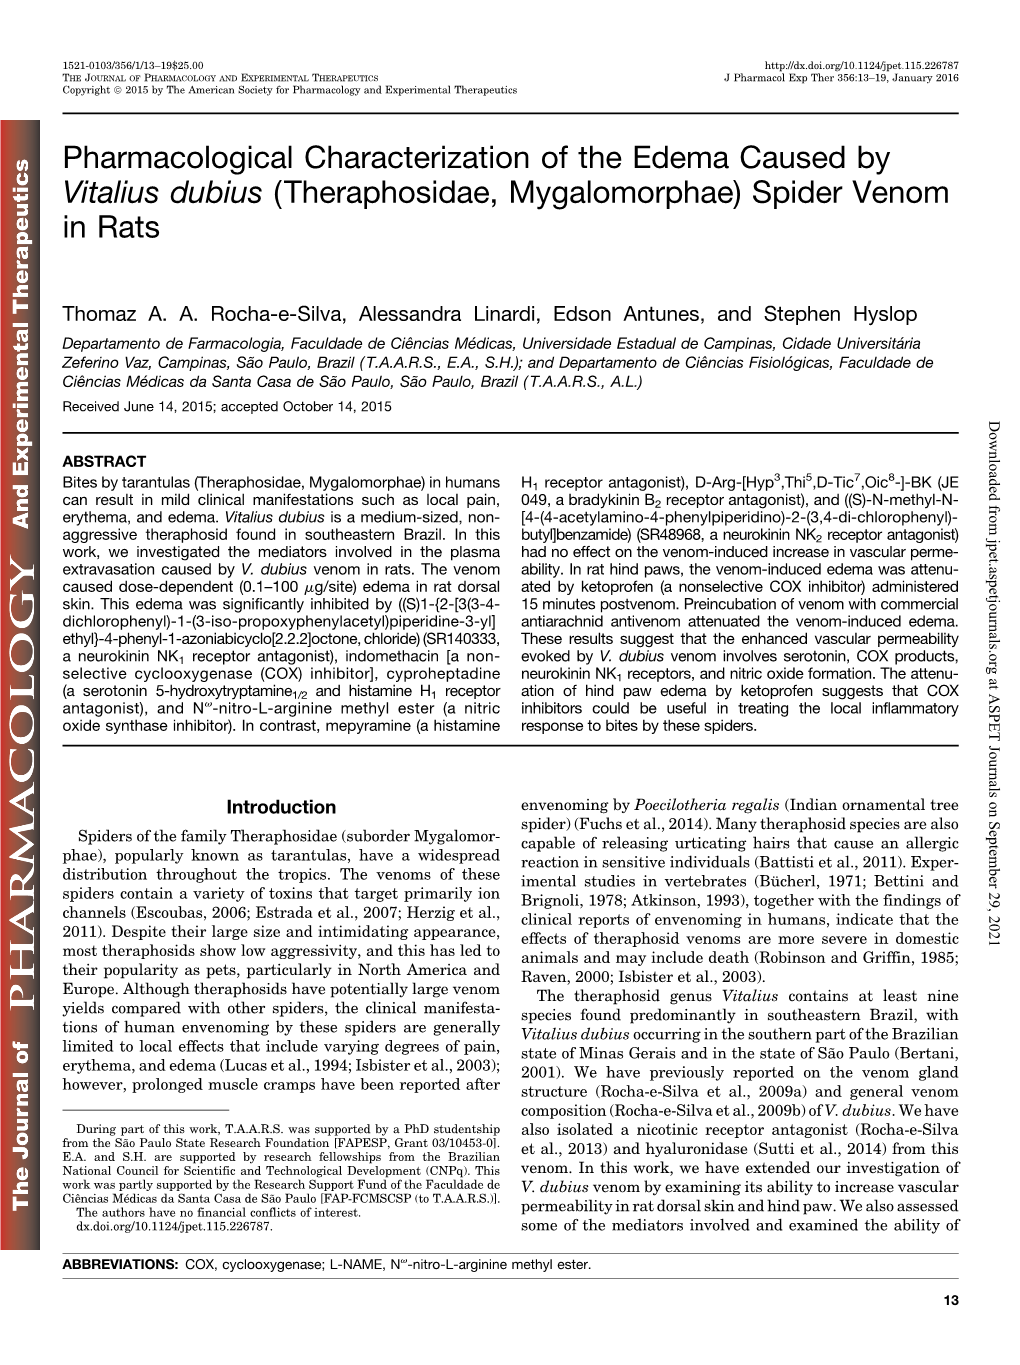 Pharmacological Characterization of the Edema Caused by Vitalius Dubius (Theraphosidae, Mygalomorphae) Spider Venom in Rats